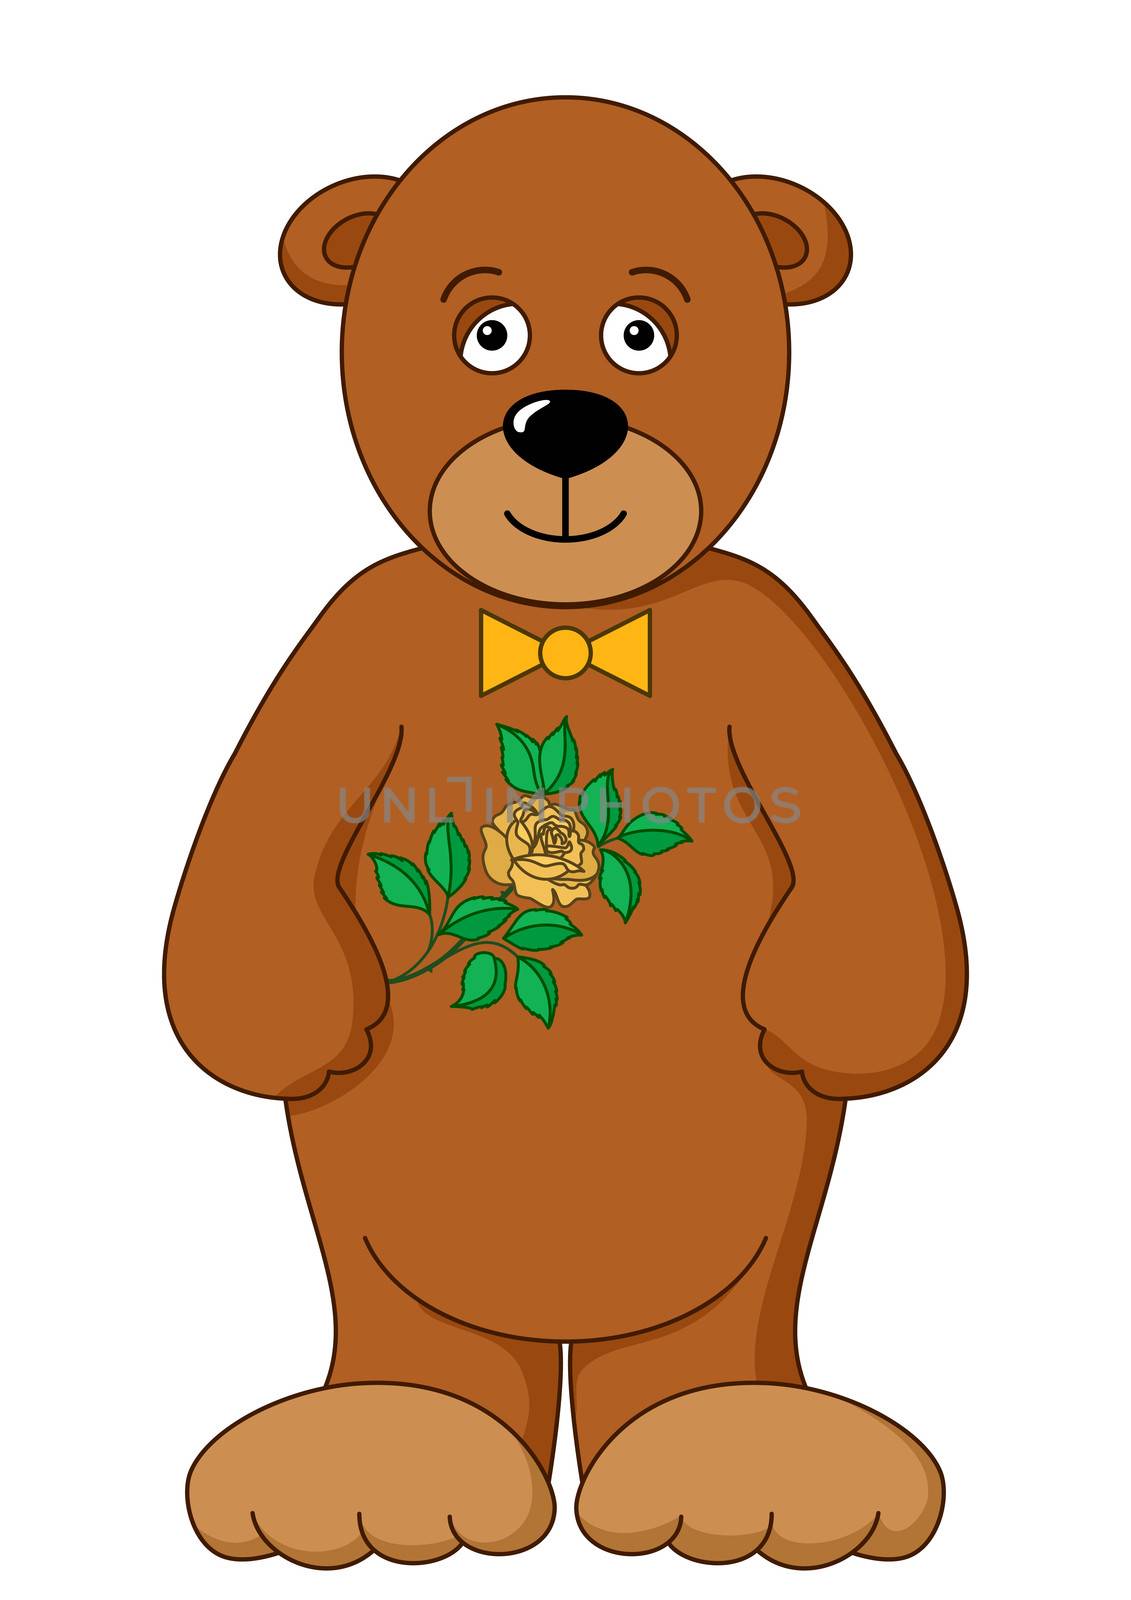 Teddy bear with flower by alexcoolok